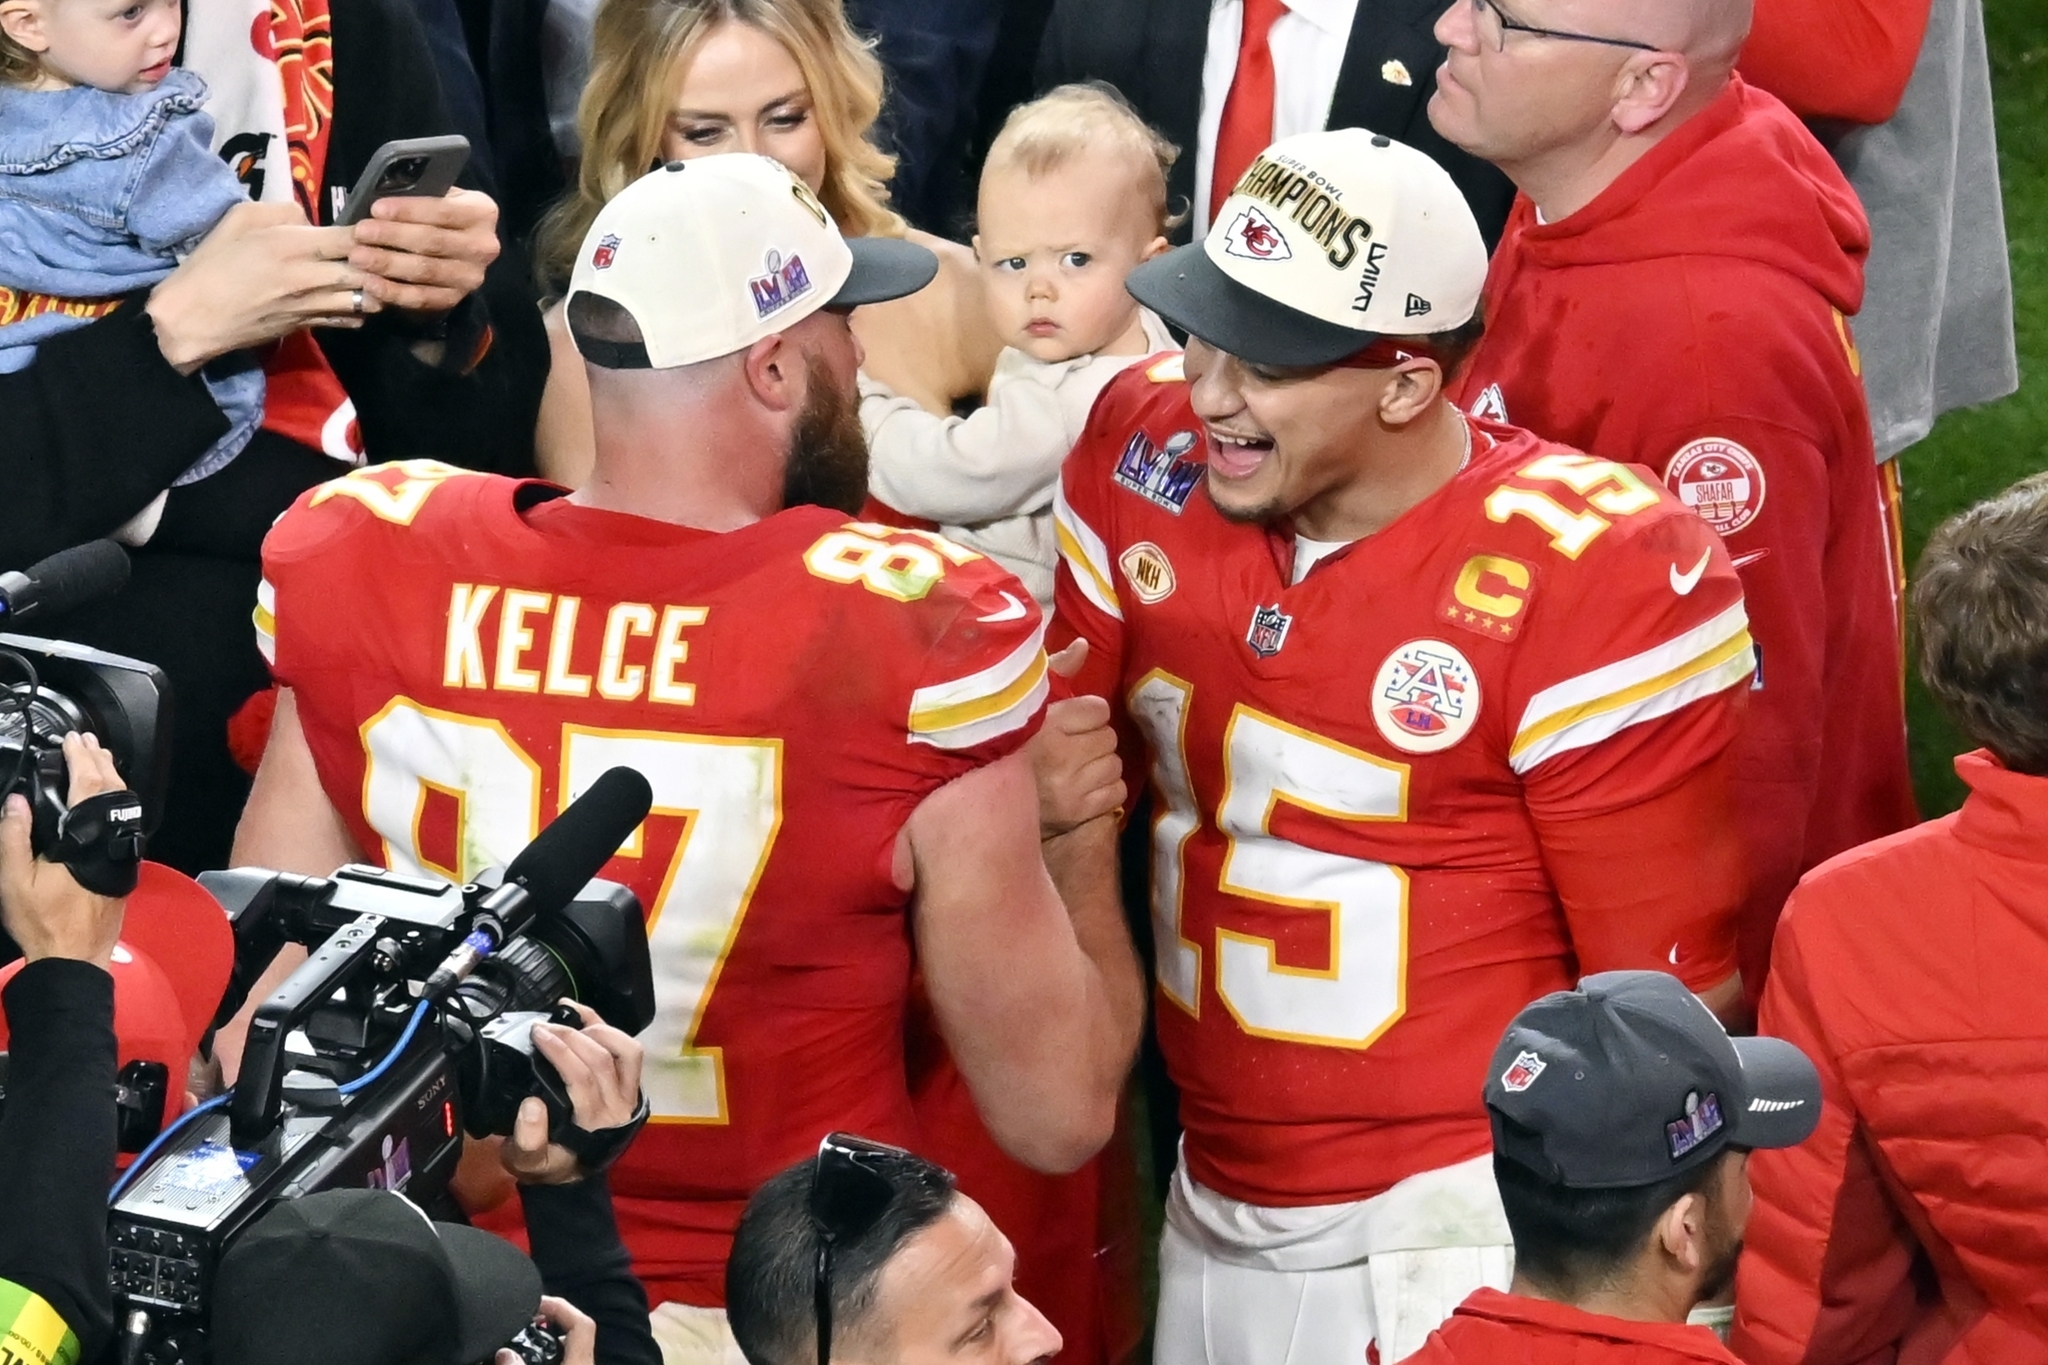 Kelce and MAhomes